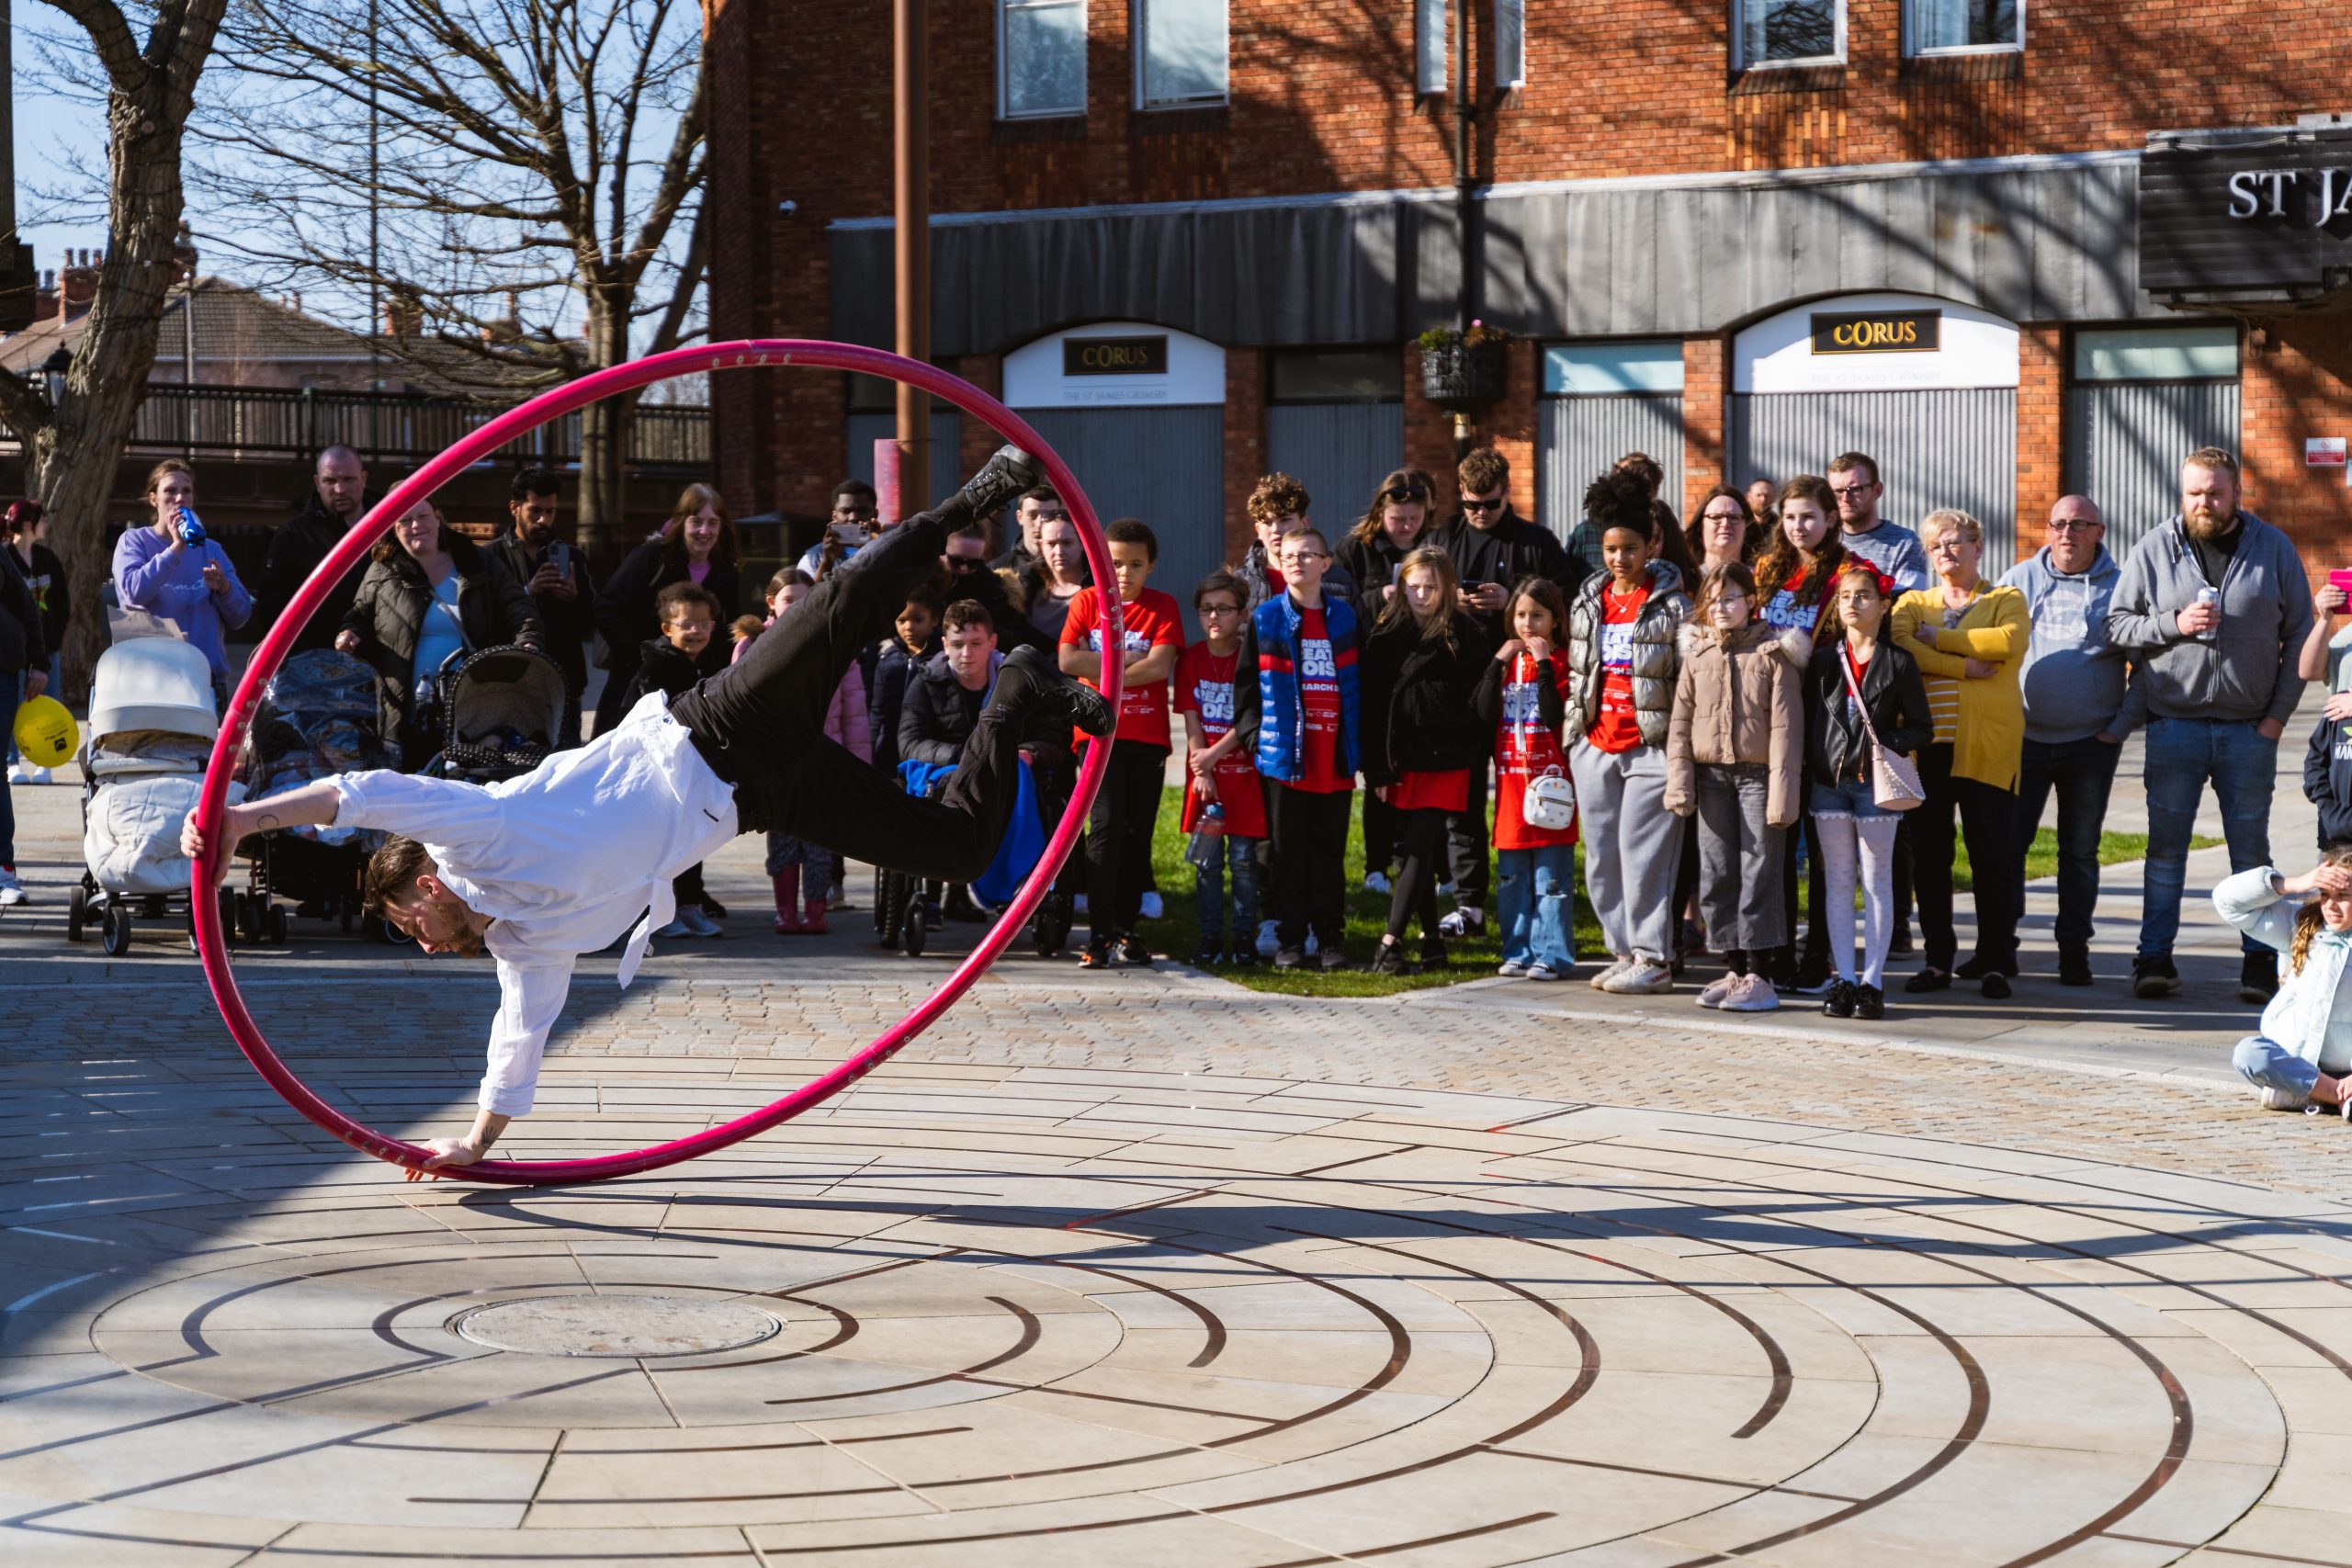 A performer spinning around in a hula hoop